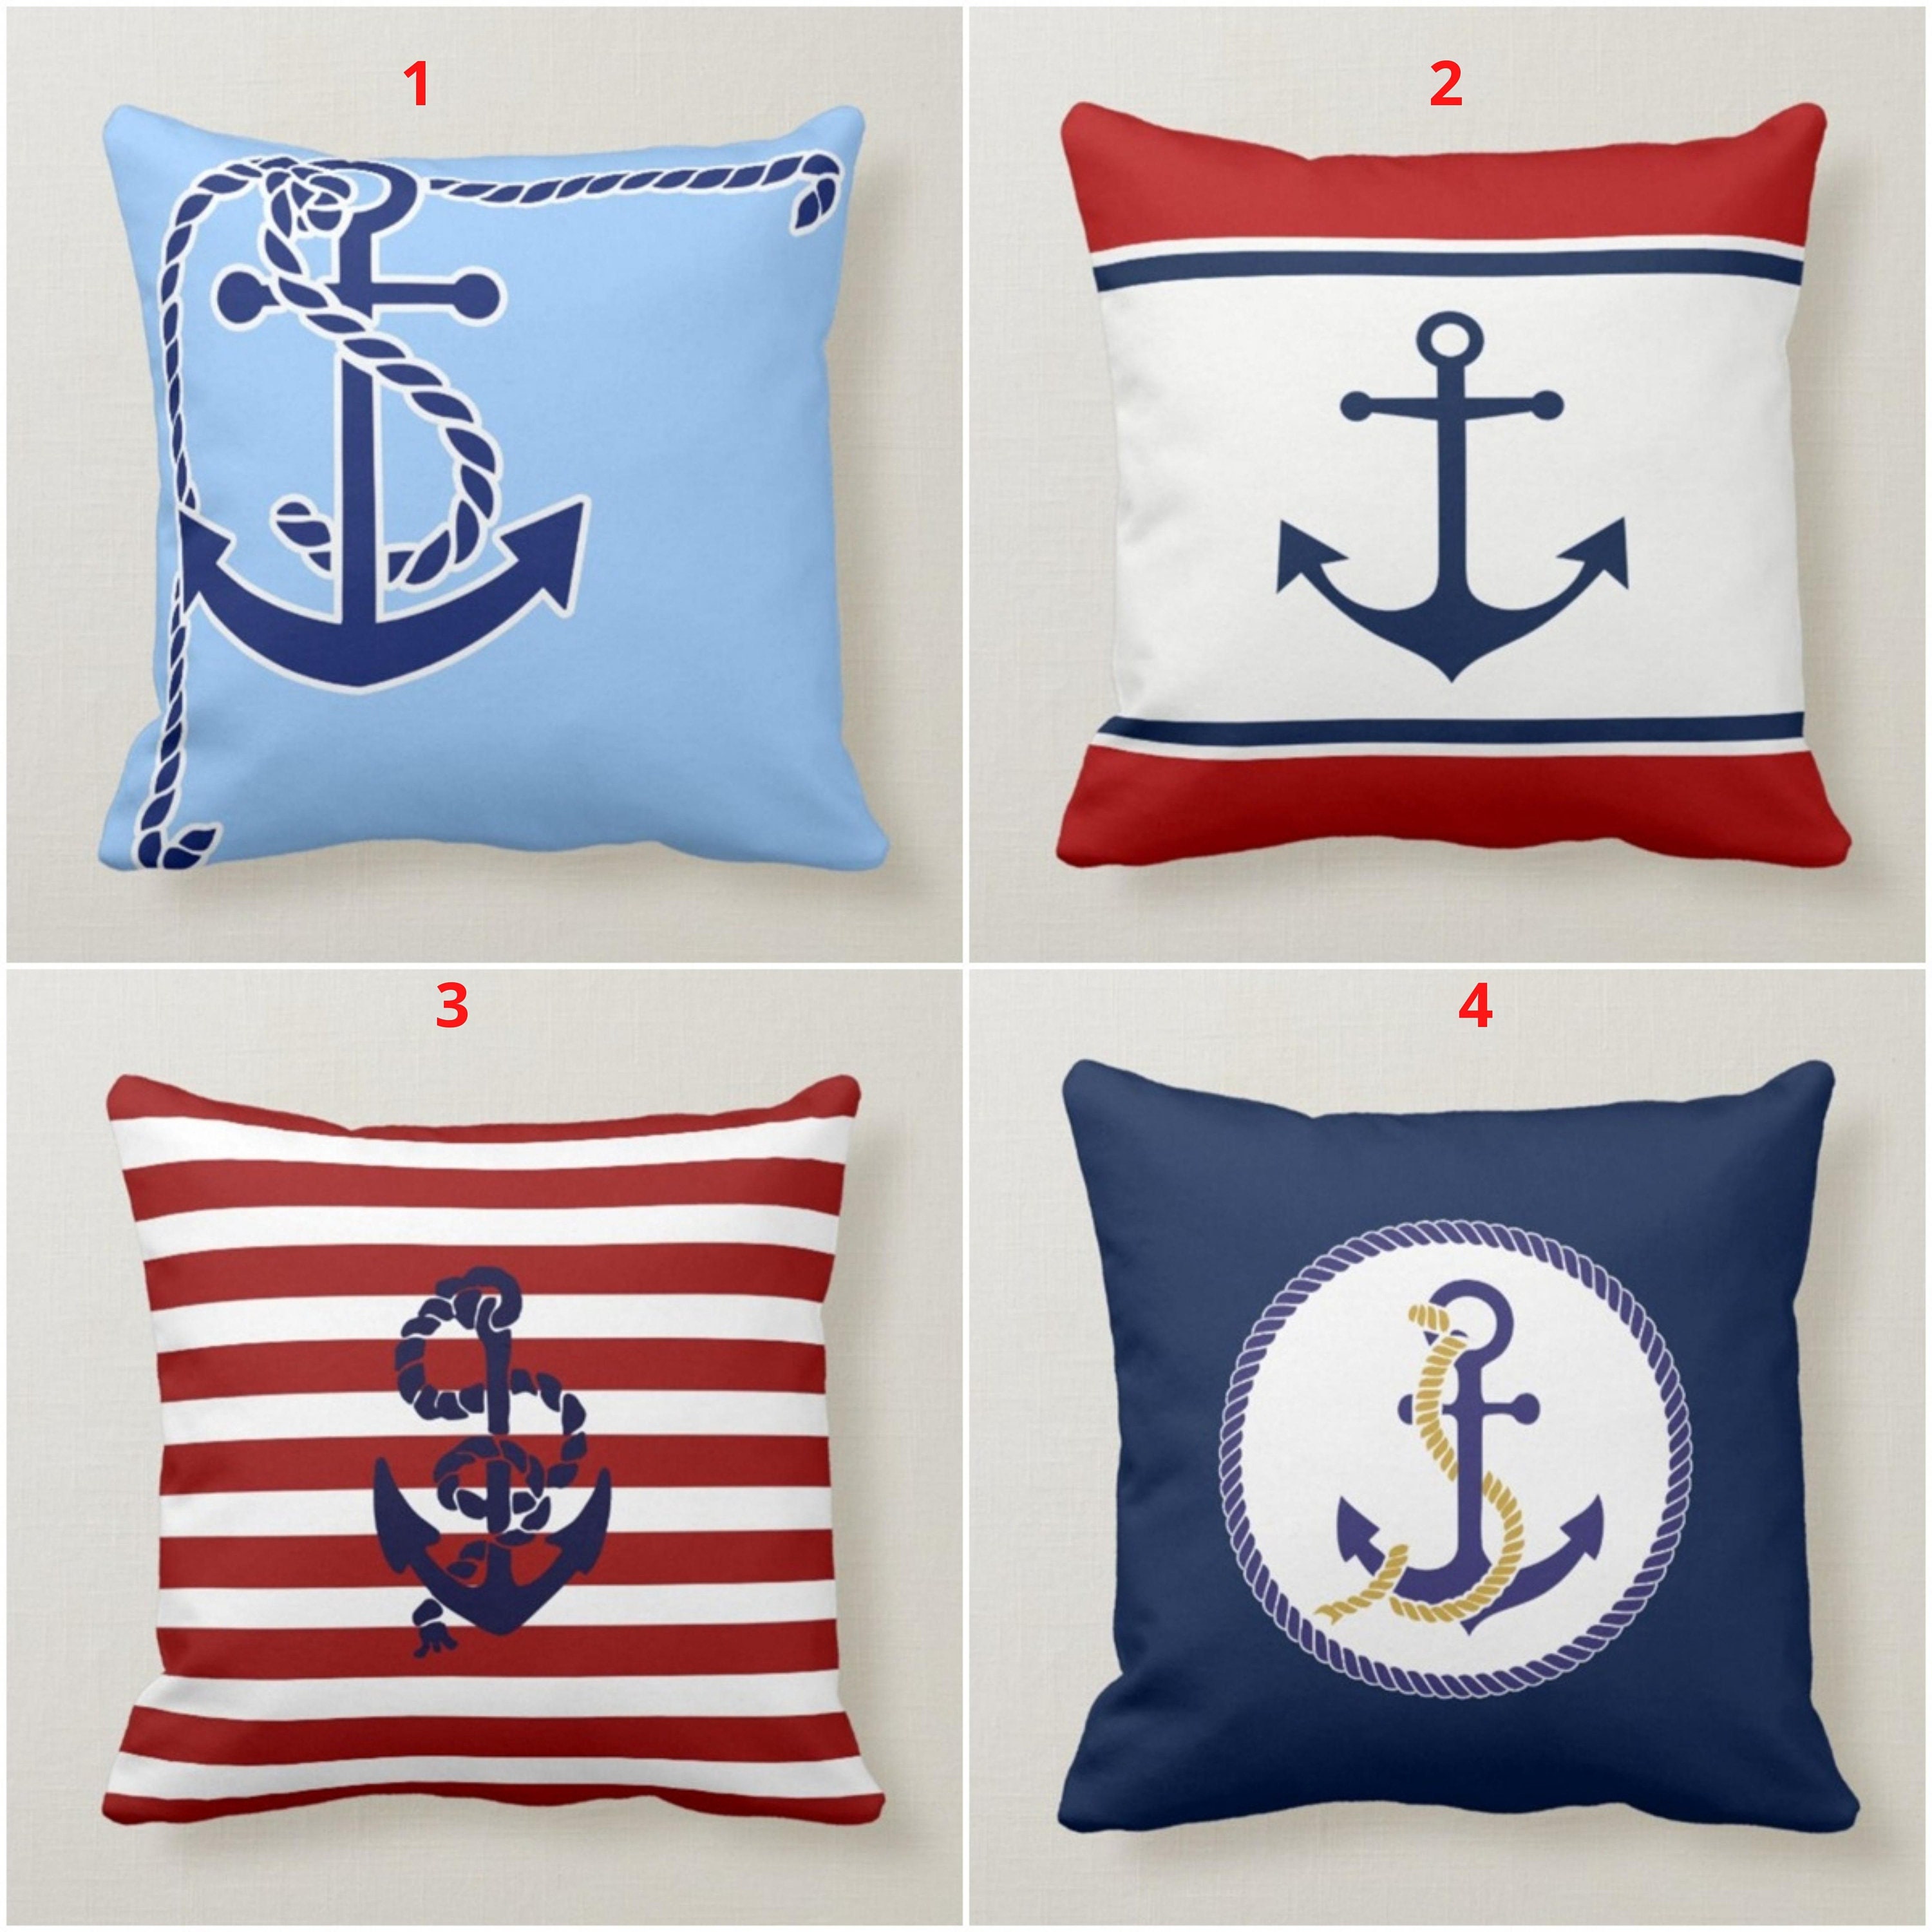 Decorative Anchor Throw Pillow Cushion Cover Case 18x18 in US SELLER!!! 